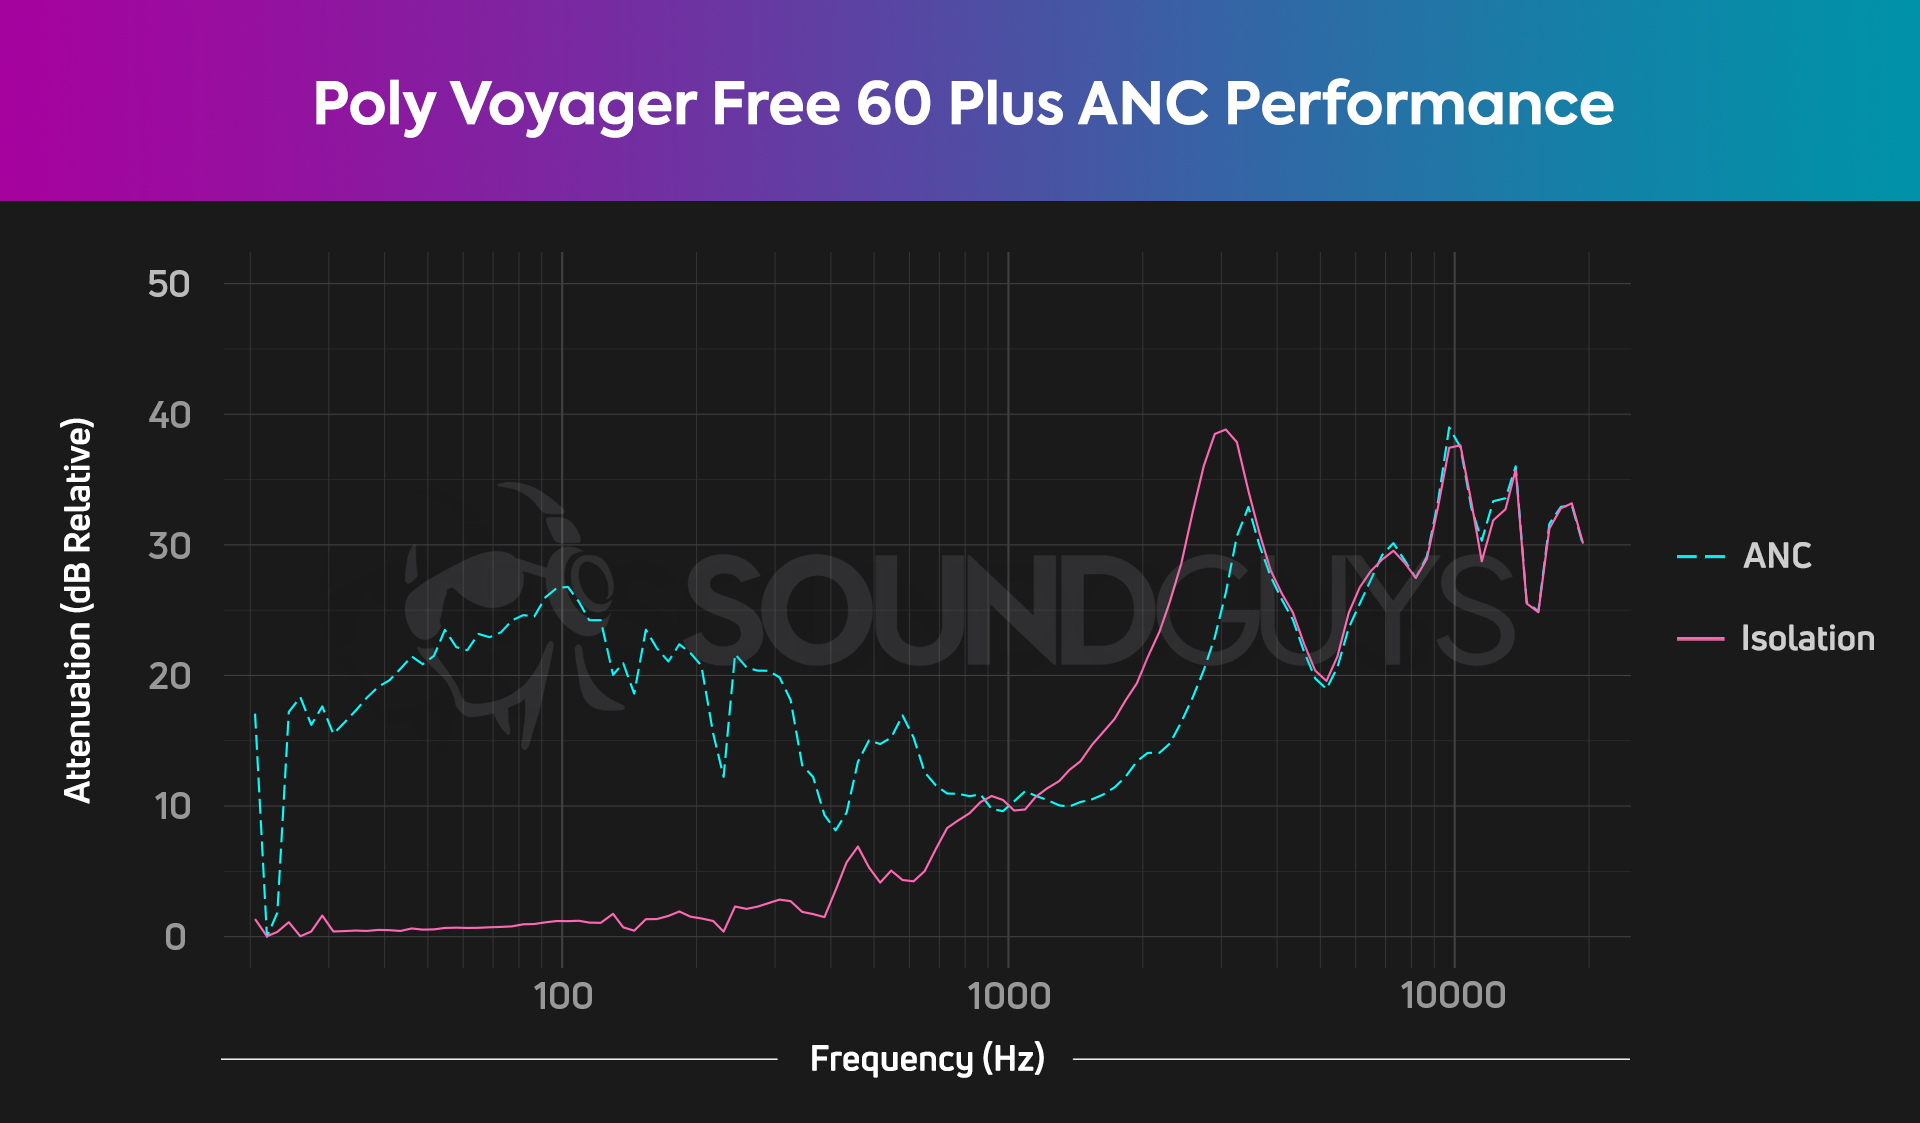 A chart traces the ANC and isolation of the Poly Voyager Free 60+.